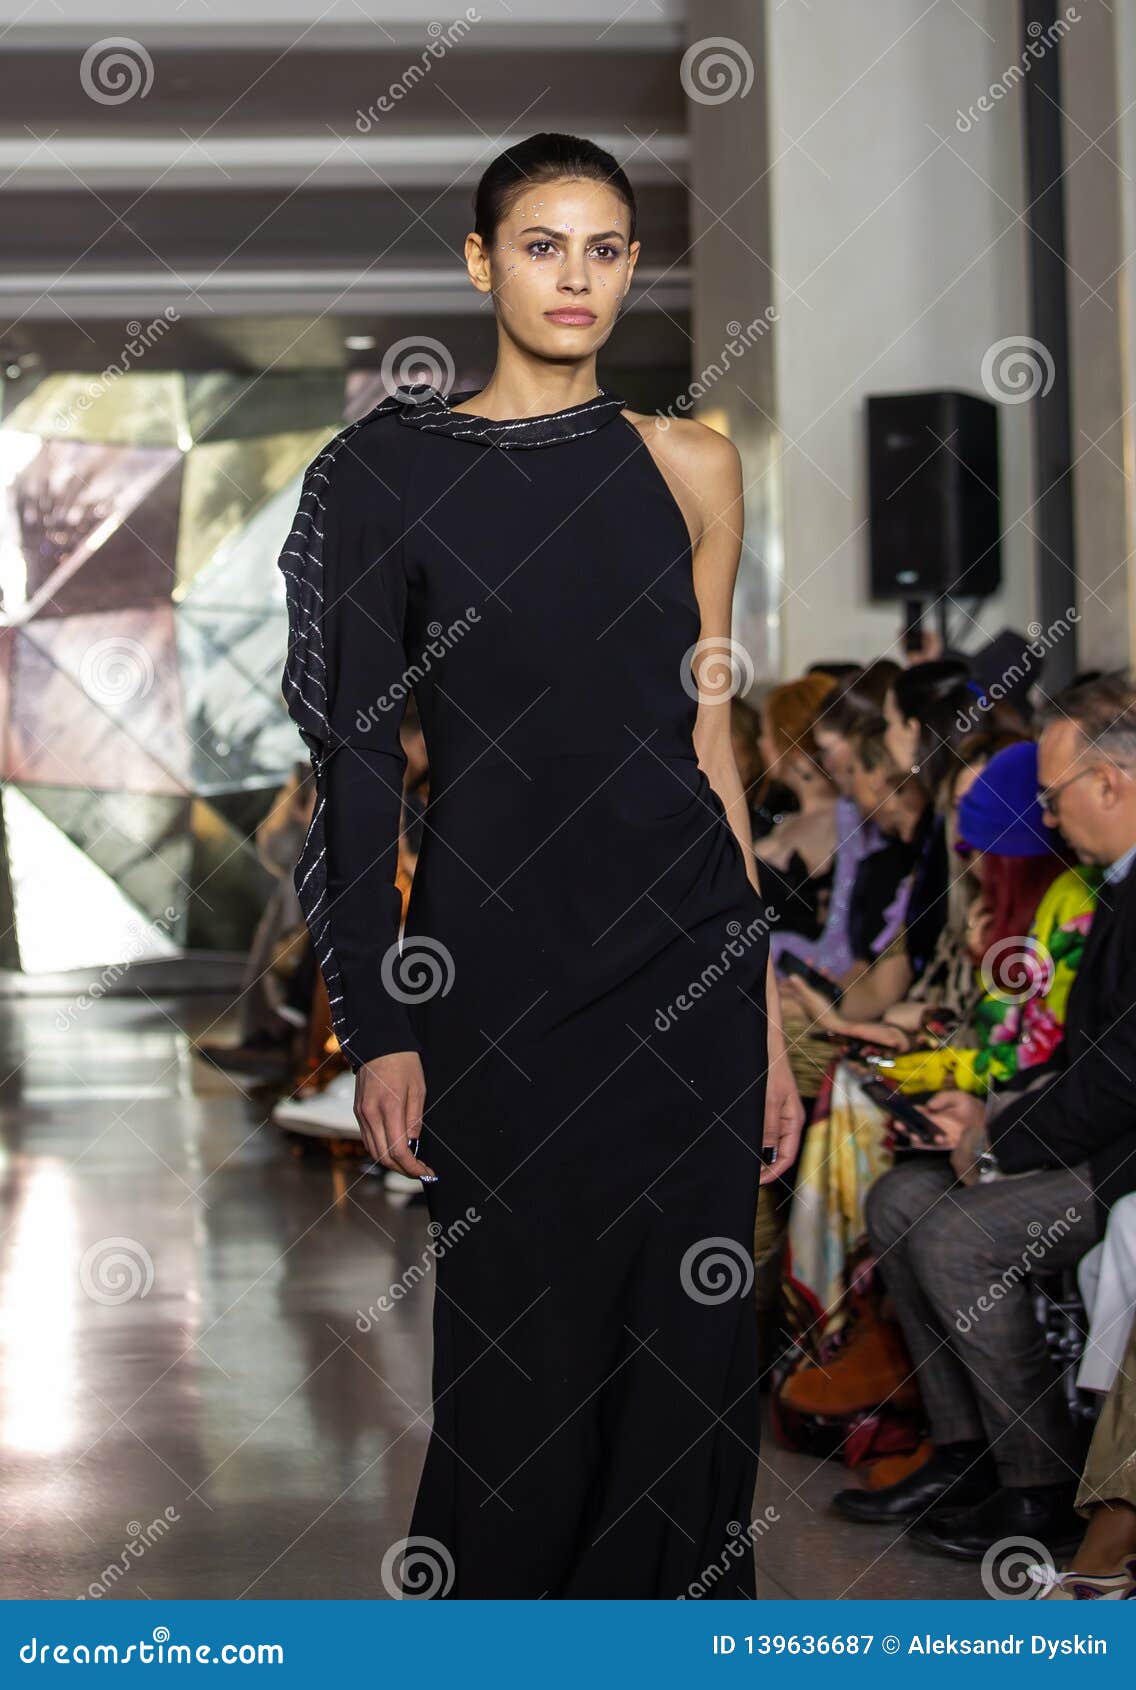 Christian Siriano FW19 Runway Show As Part of NYFW Editorial ...